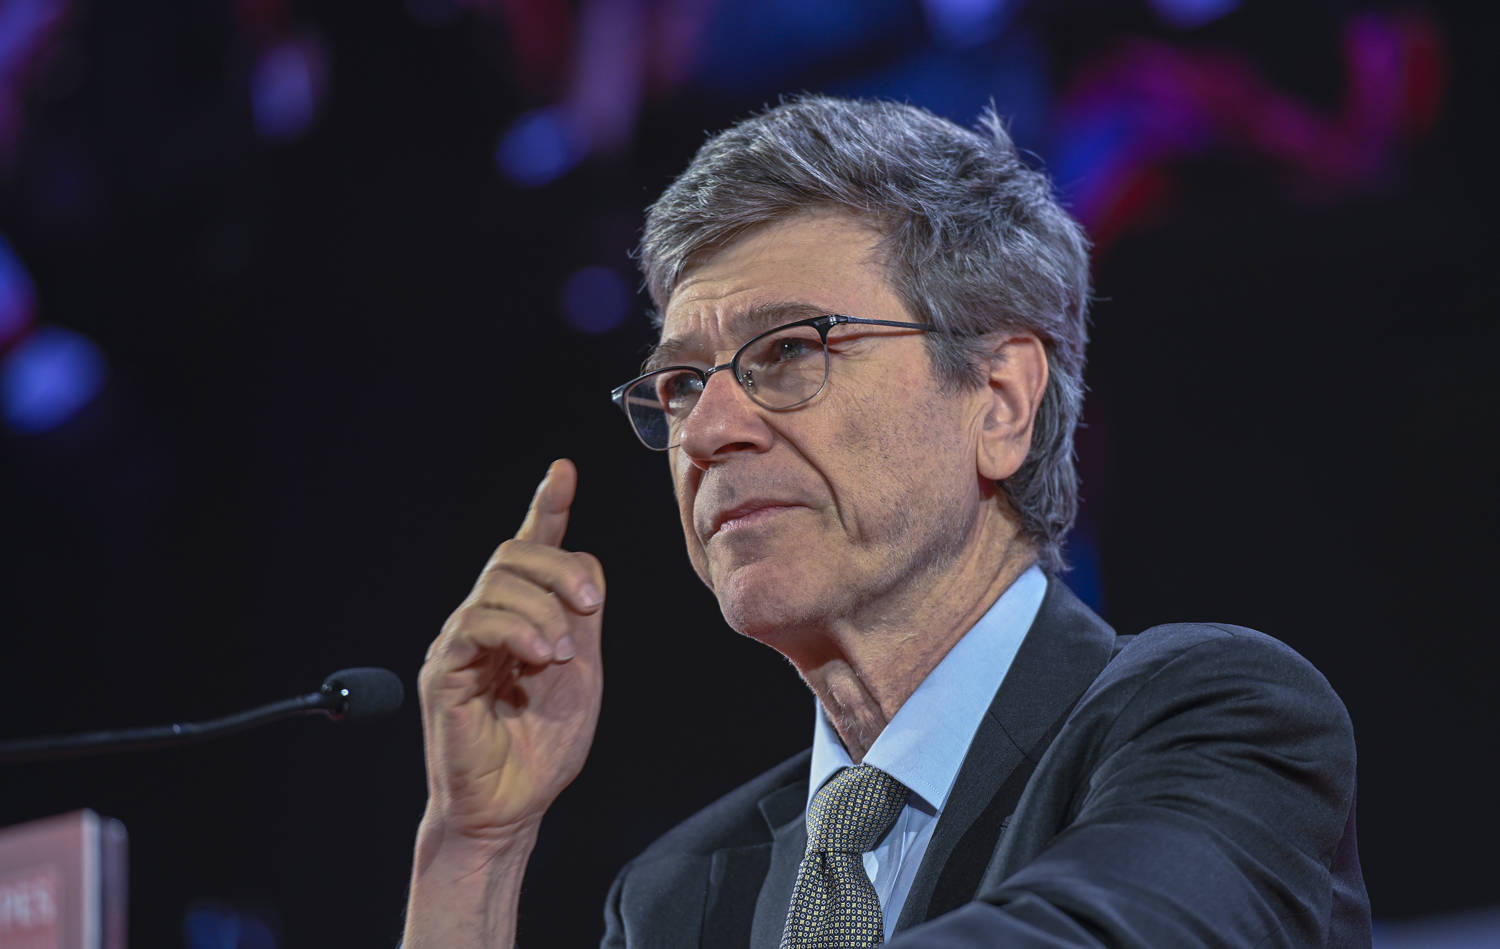 Jeffrey Sachs gave the PRIO Annual Peace Address in 2021. Photo: Horacio Villalobos / Getty Images